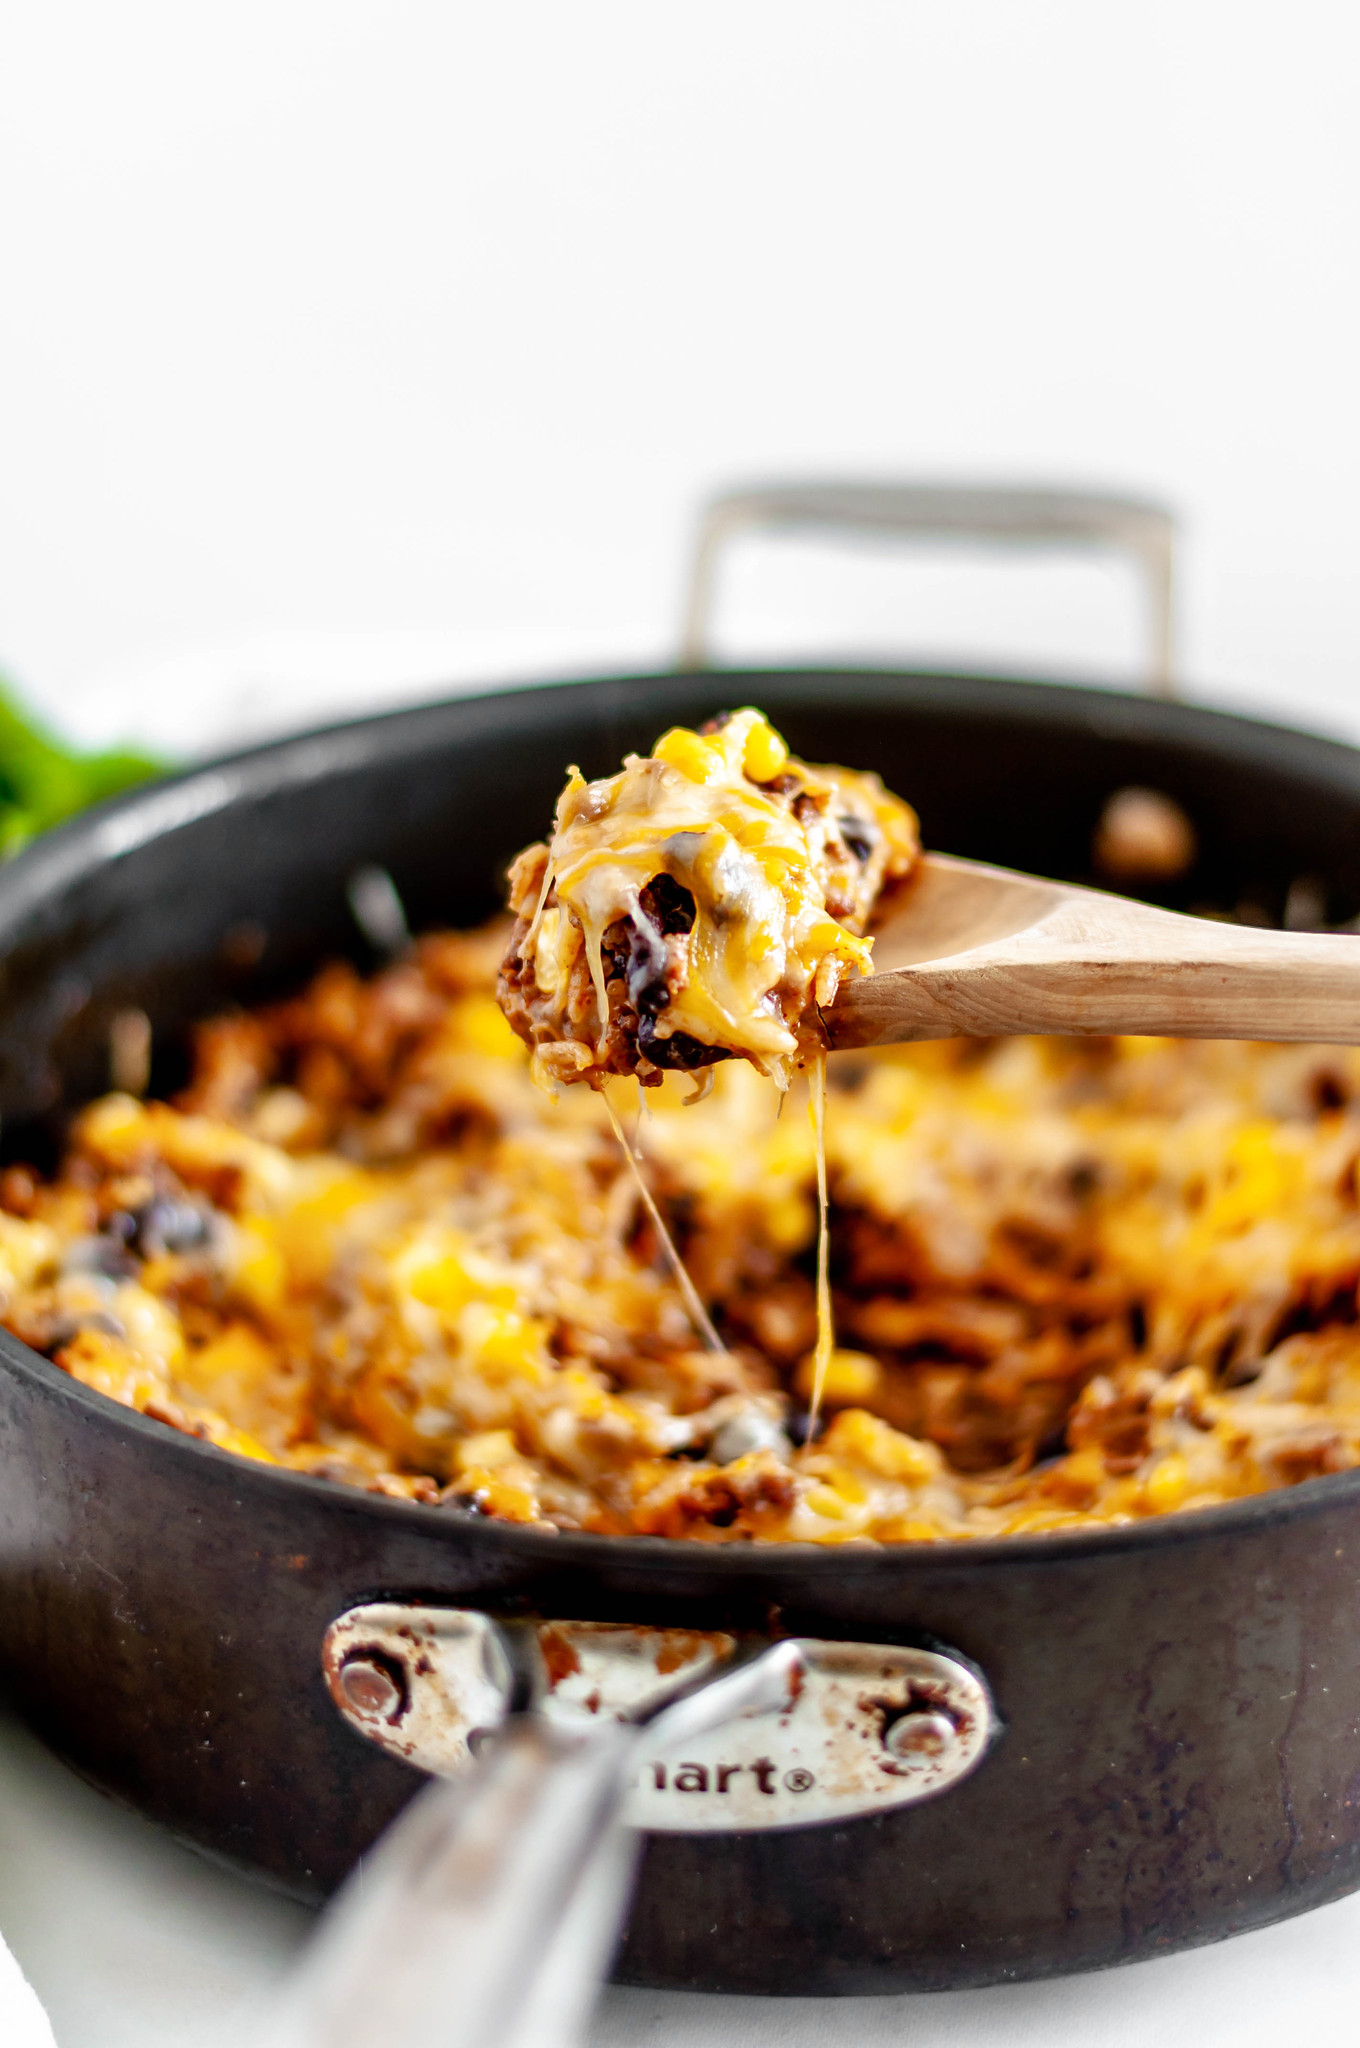 This Cheesy Mexican Skillet is done in 30 minutes for the perfect weeknight meal. Packed full of Mexican flavor from enchilada sauce, cumin, chili powder and more.